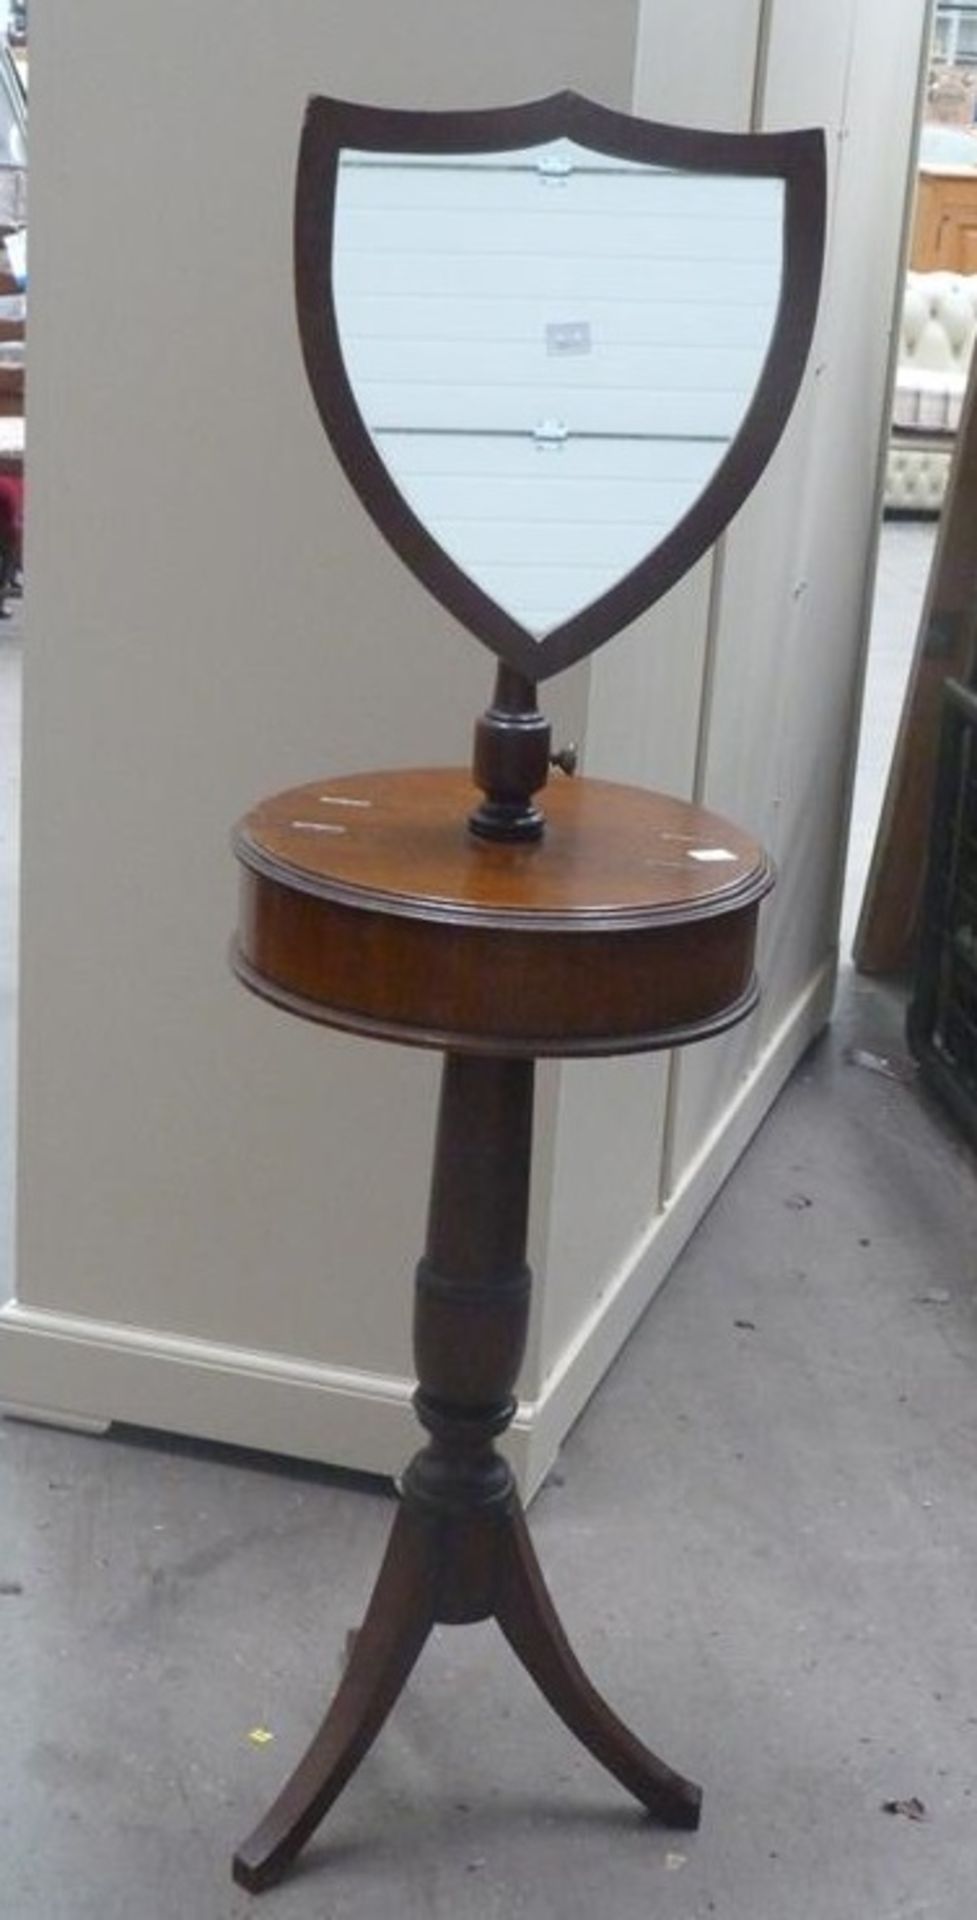 An Edwardian, two Compartment Shaving Stand with tilting Shield Mirror (H 140cm D 40cm) (est £45-£